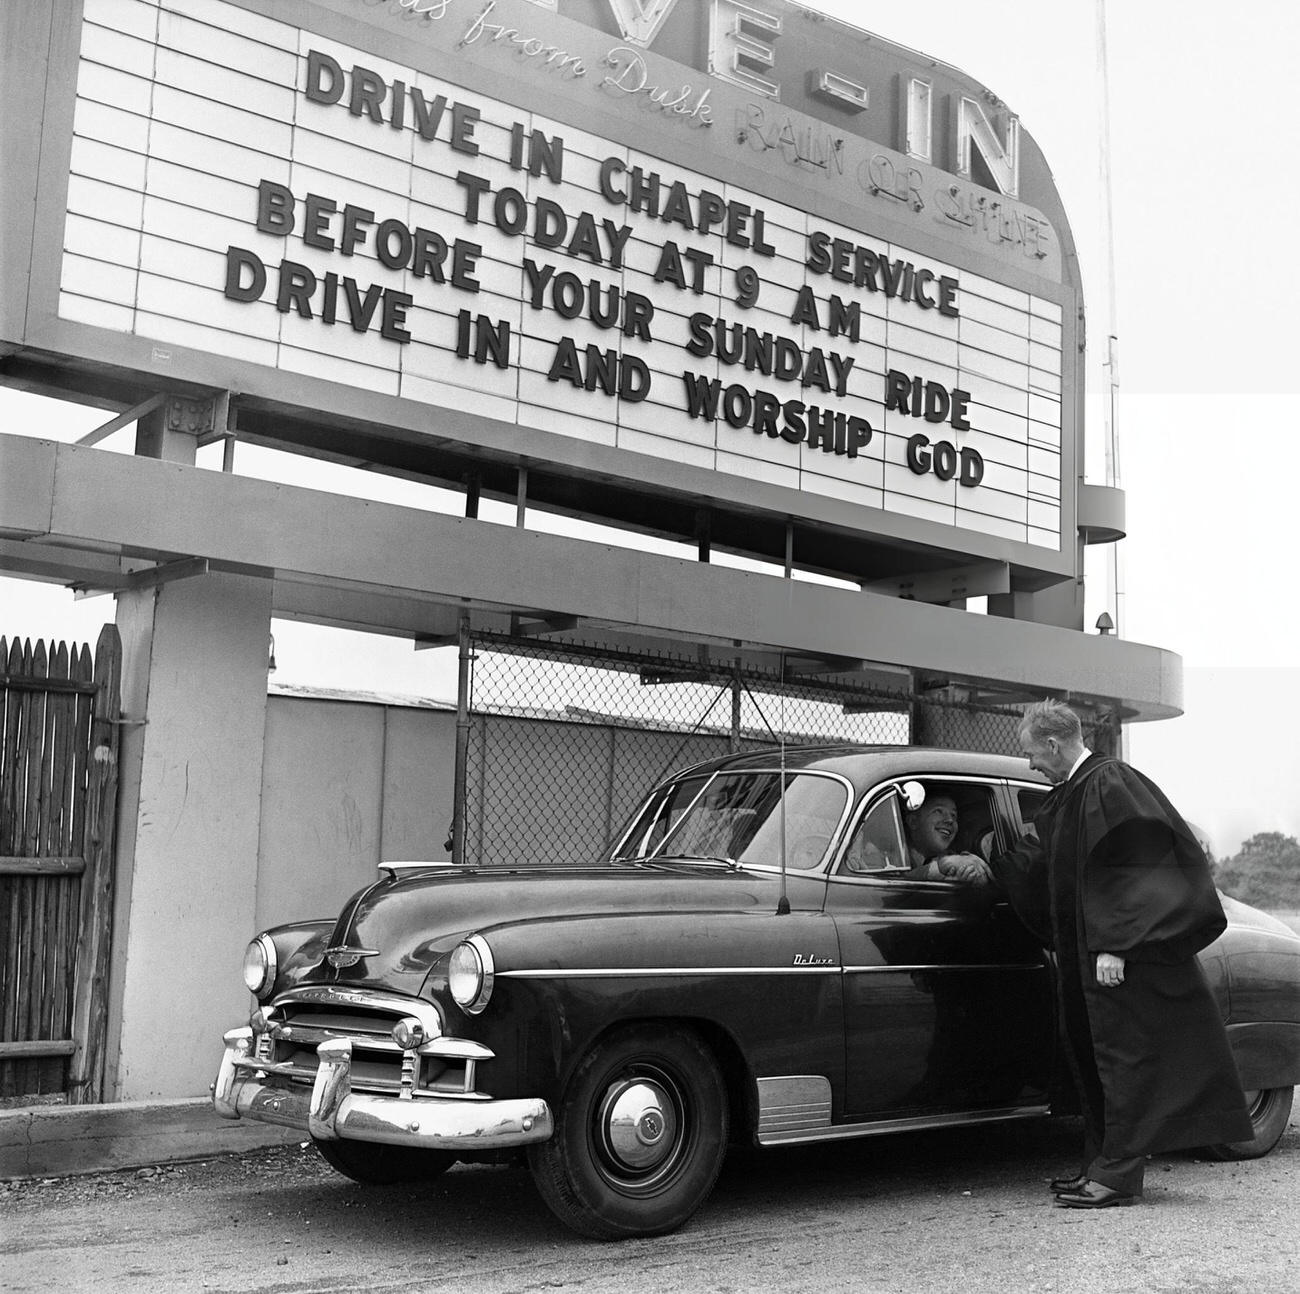 The Reverend C. Lloyd Lee Holds A Drive-In Chapel Service In The Bronx.